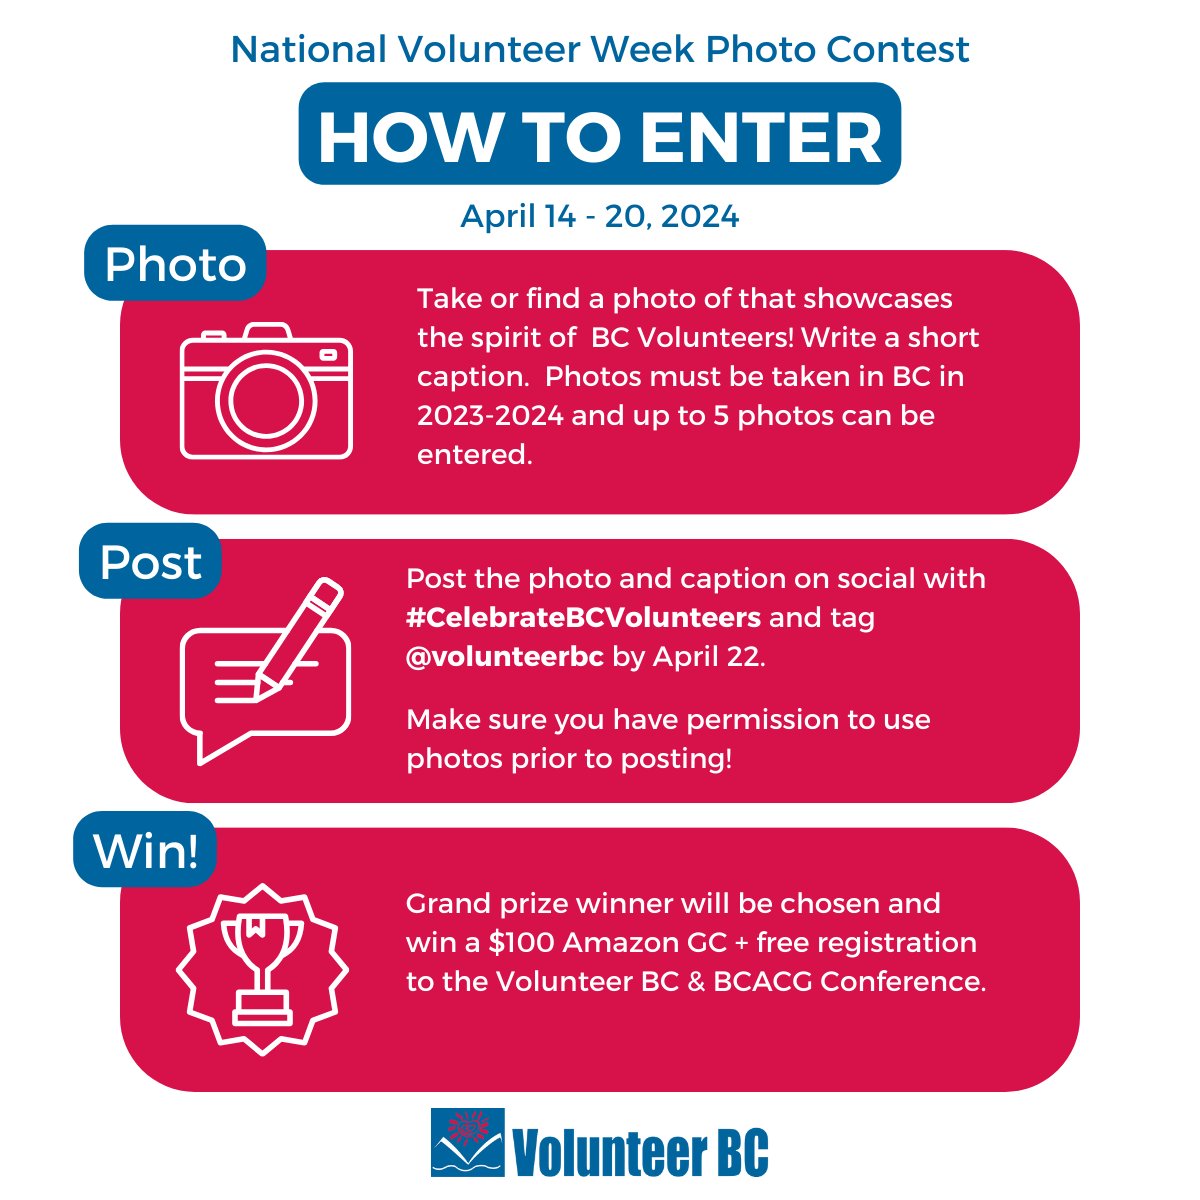 Tomorrow is the start of #NationalVolunteerWeek! We’re ready to show our love and #CelebrateBCVolunteers, are you? Get your photos ready!